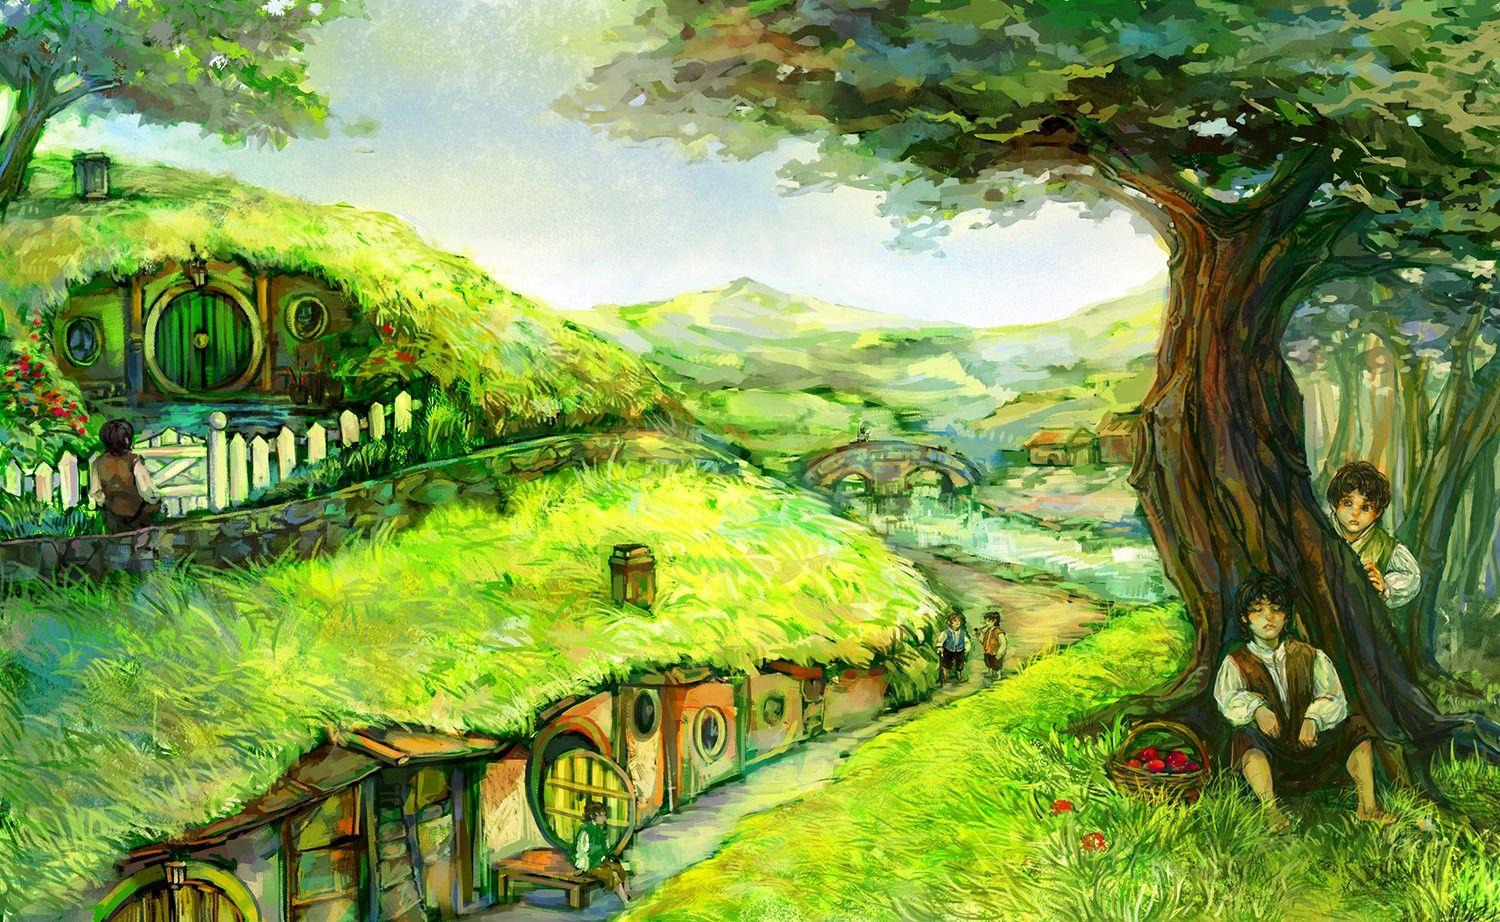 Other: LOTR Shire Hobbit Painting Cottage Hobbits Wallpaper